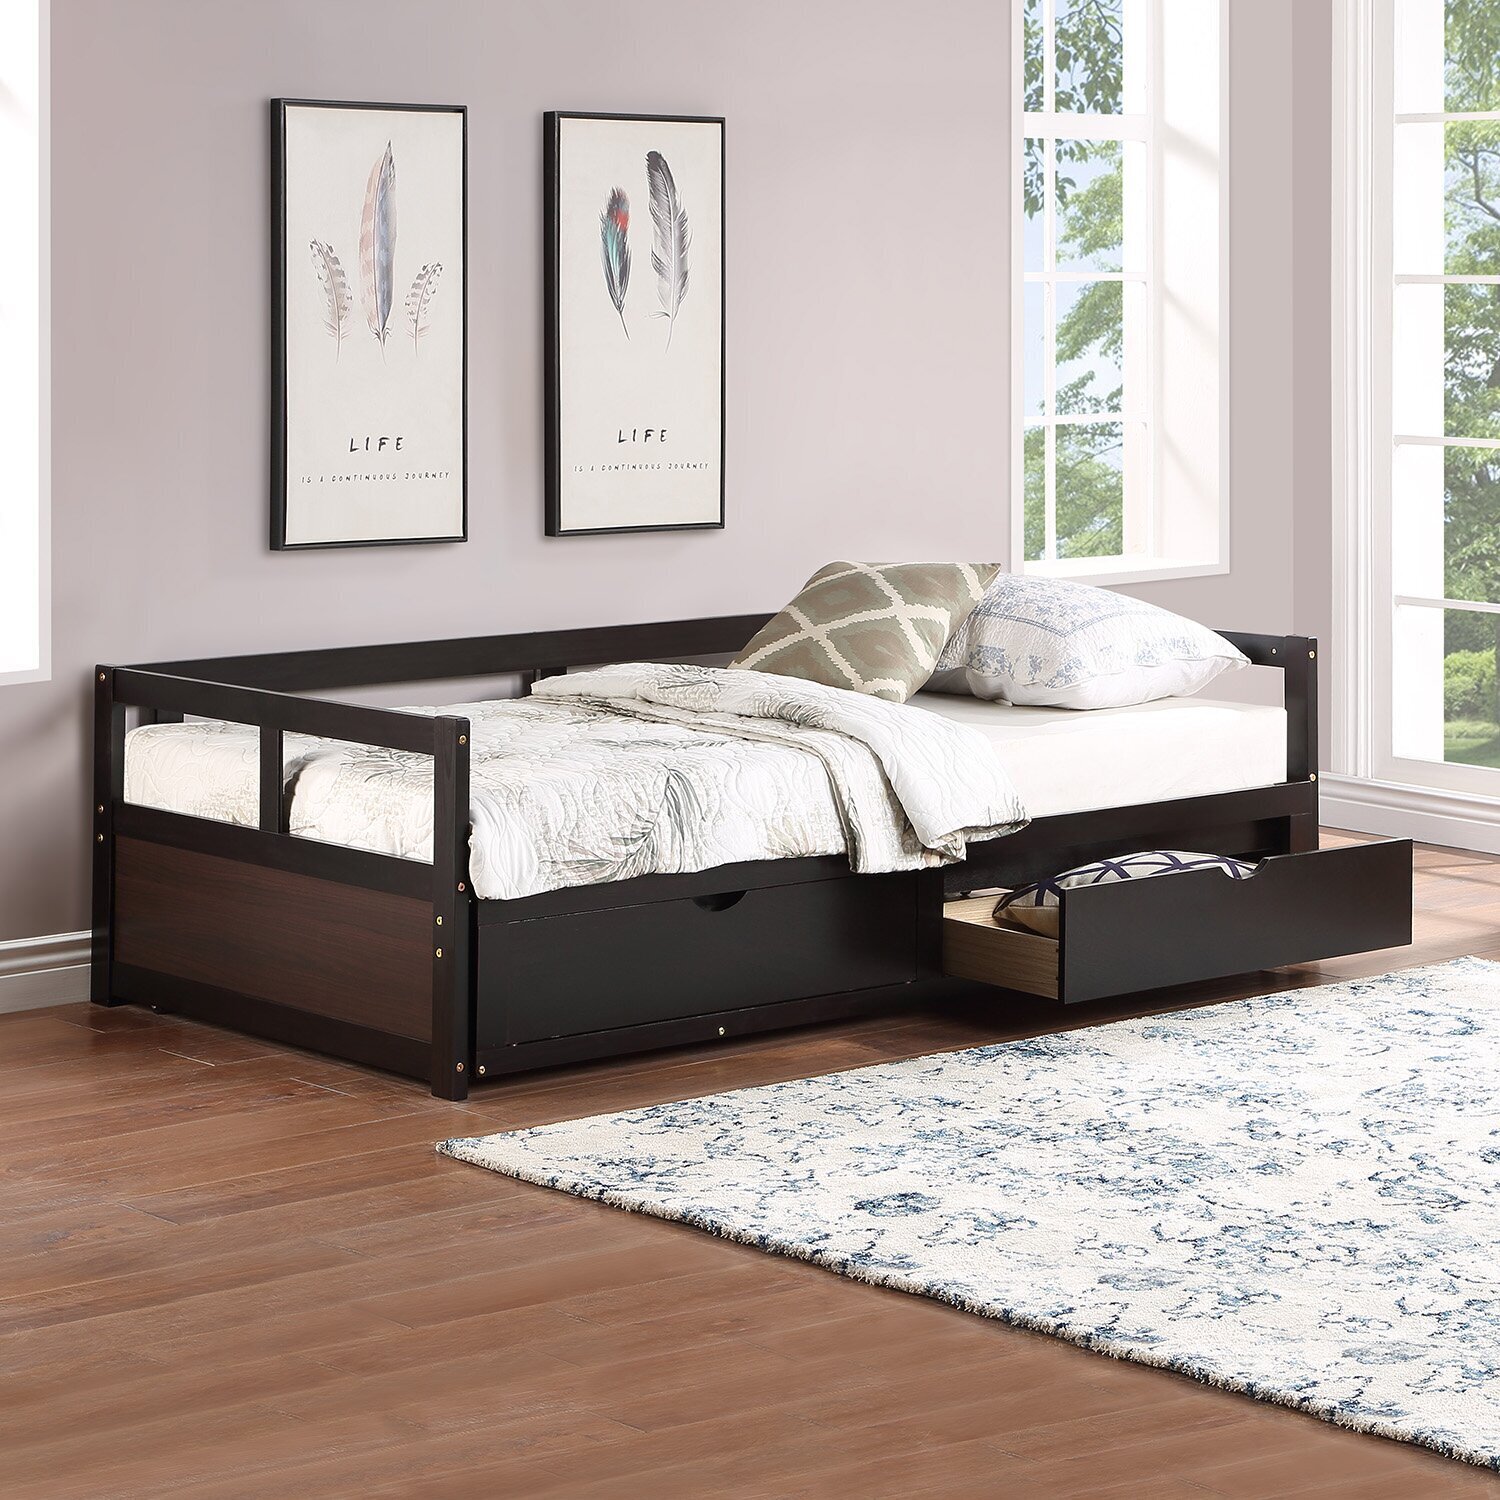 Platform Style Daybed Frame With Drawers